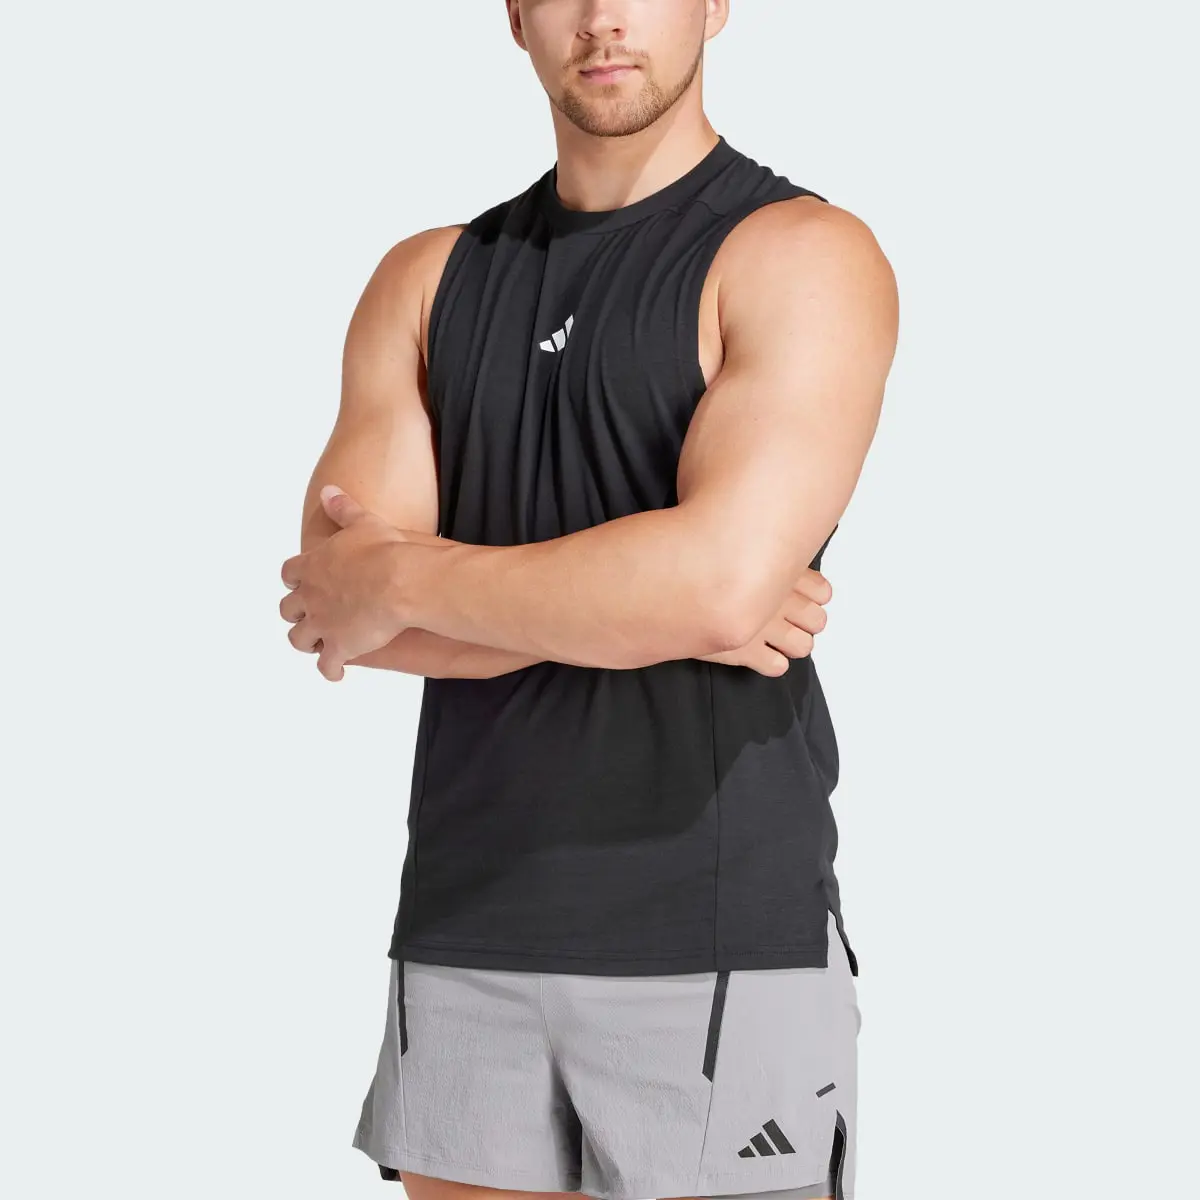 Adidas Designed for Training Workout Tanktop. 1